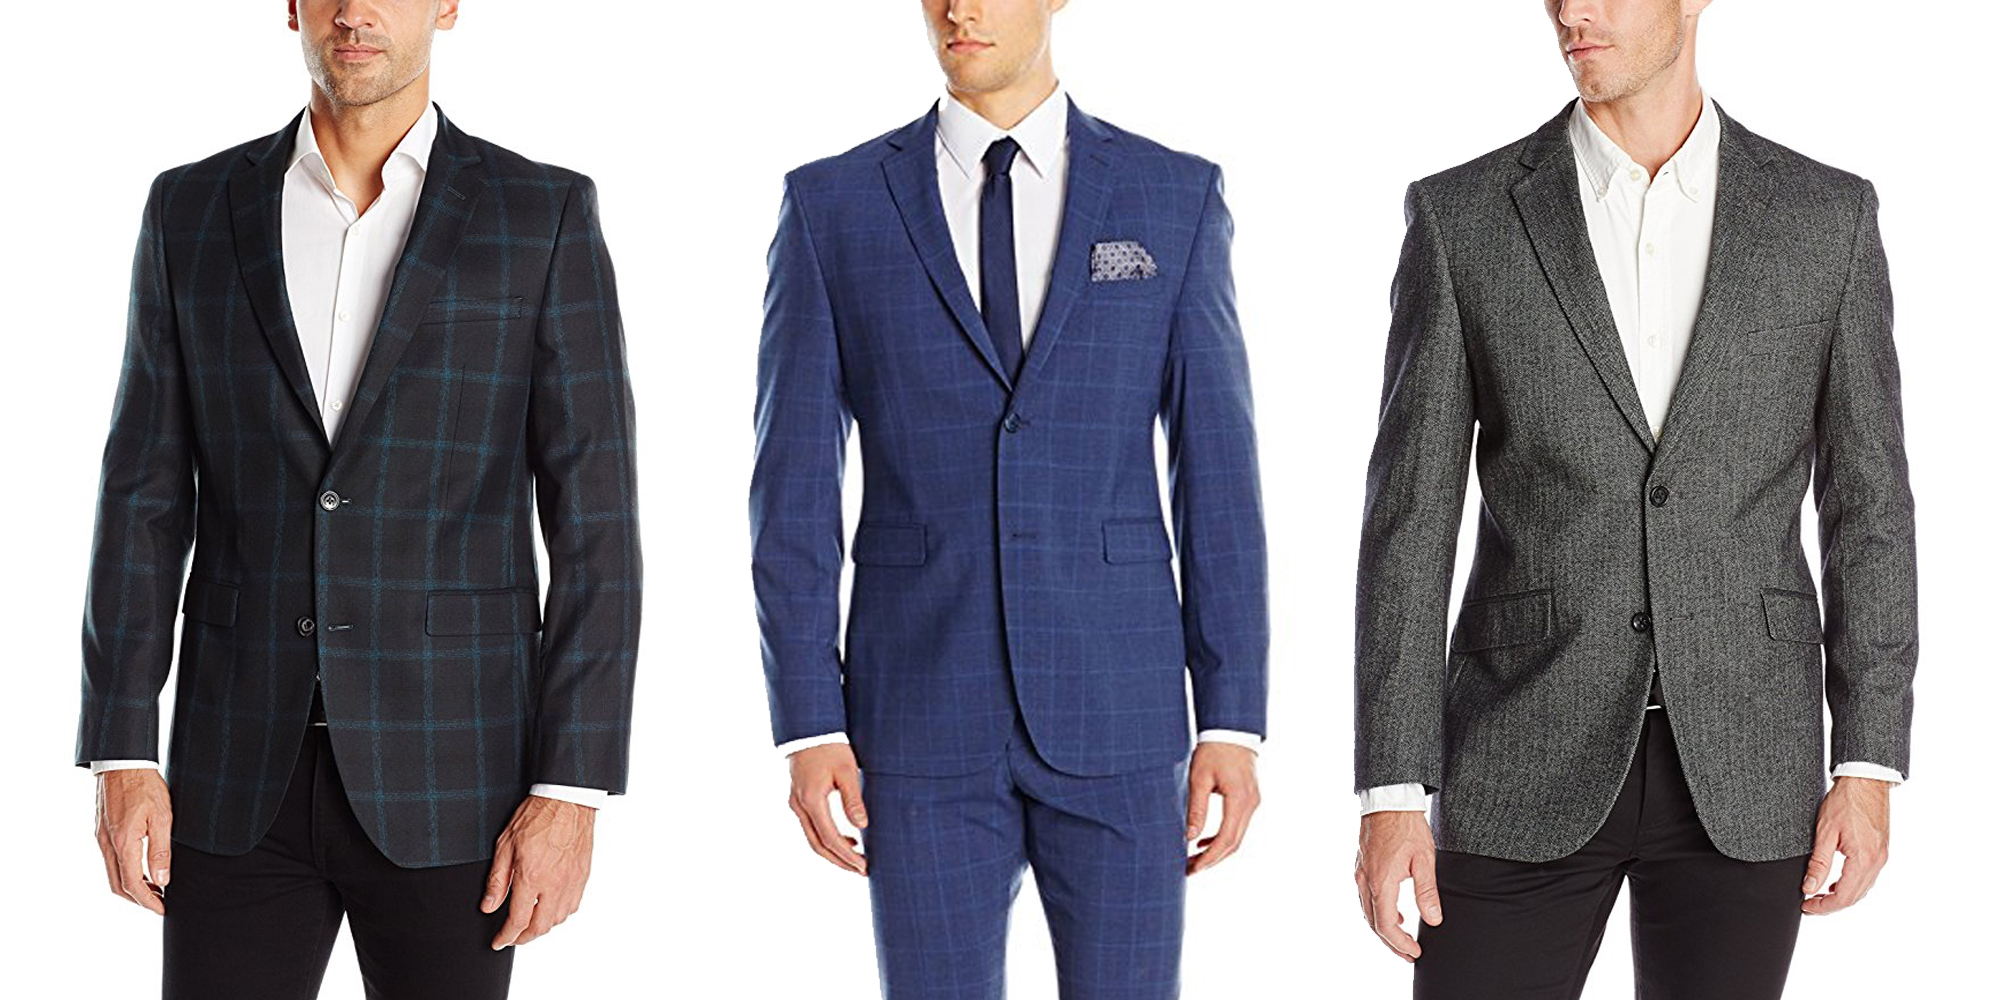 Have a spring or summer event? Here are the top men's suits under $100